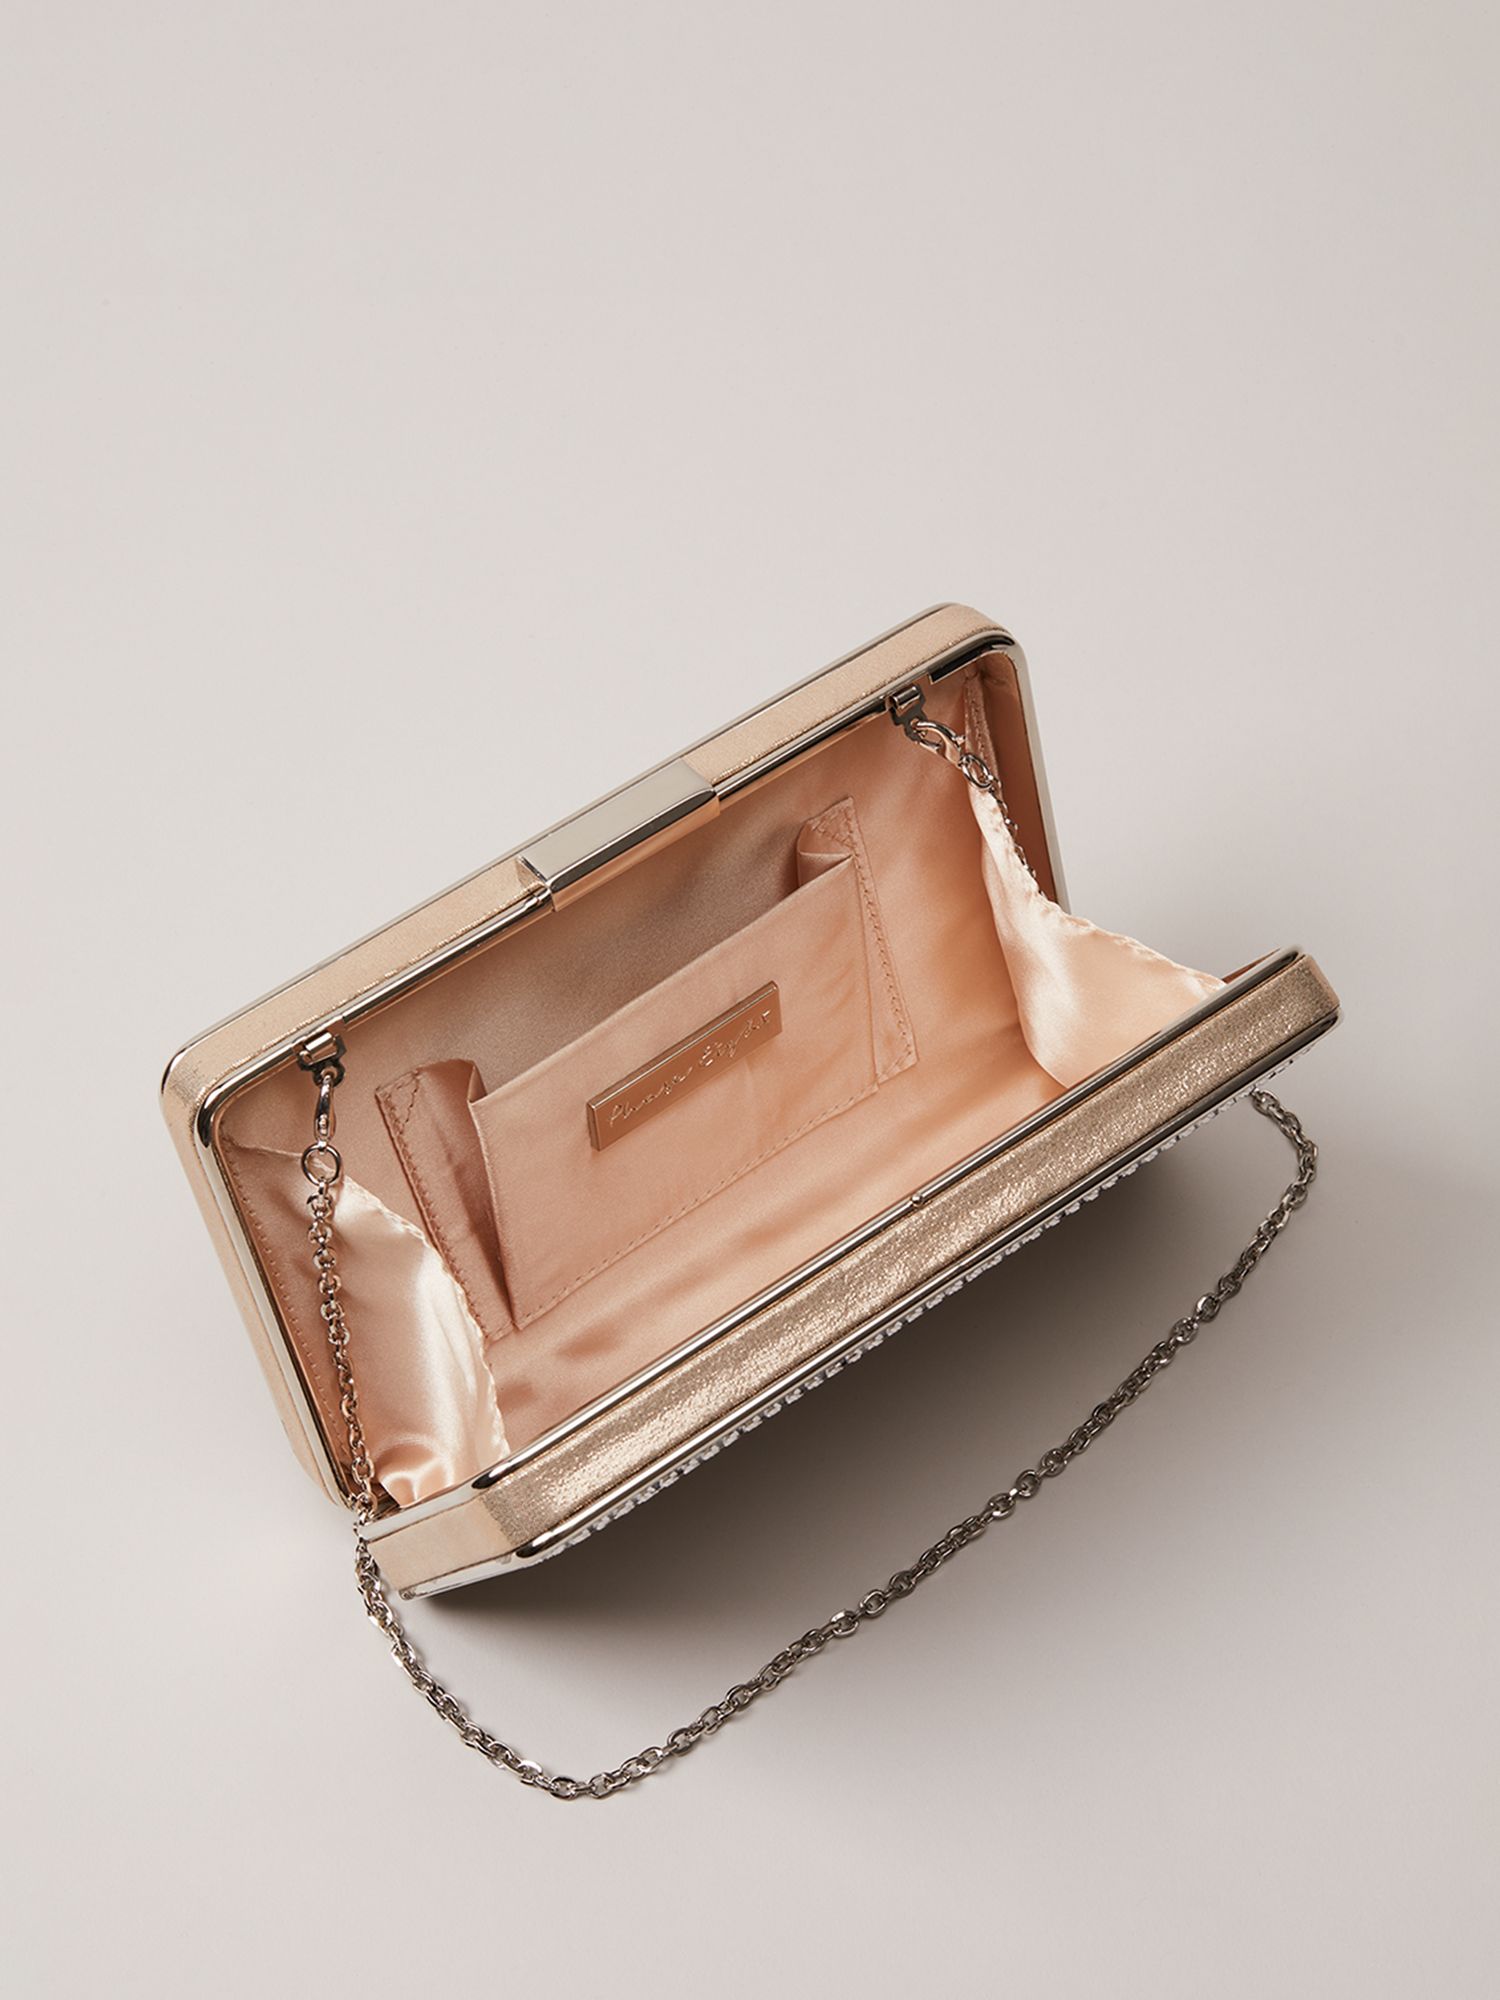 Phase Eight Sparkle Clutch Bag, Nude/Silver, One Size